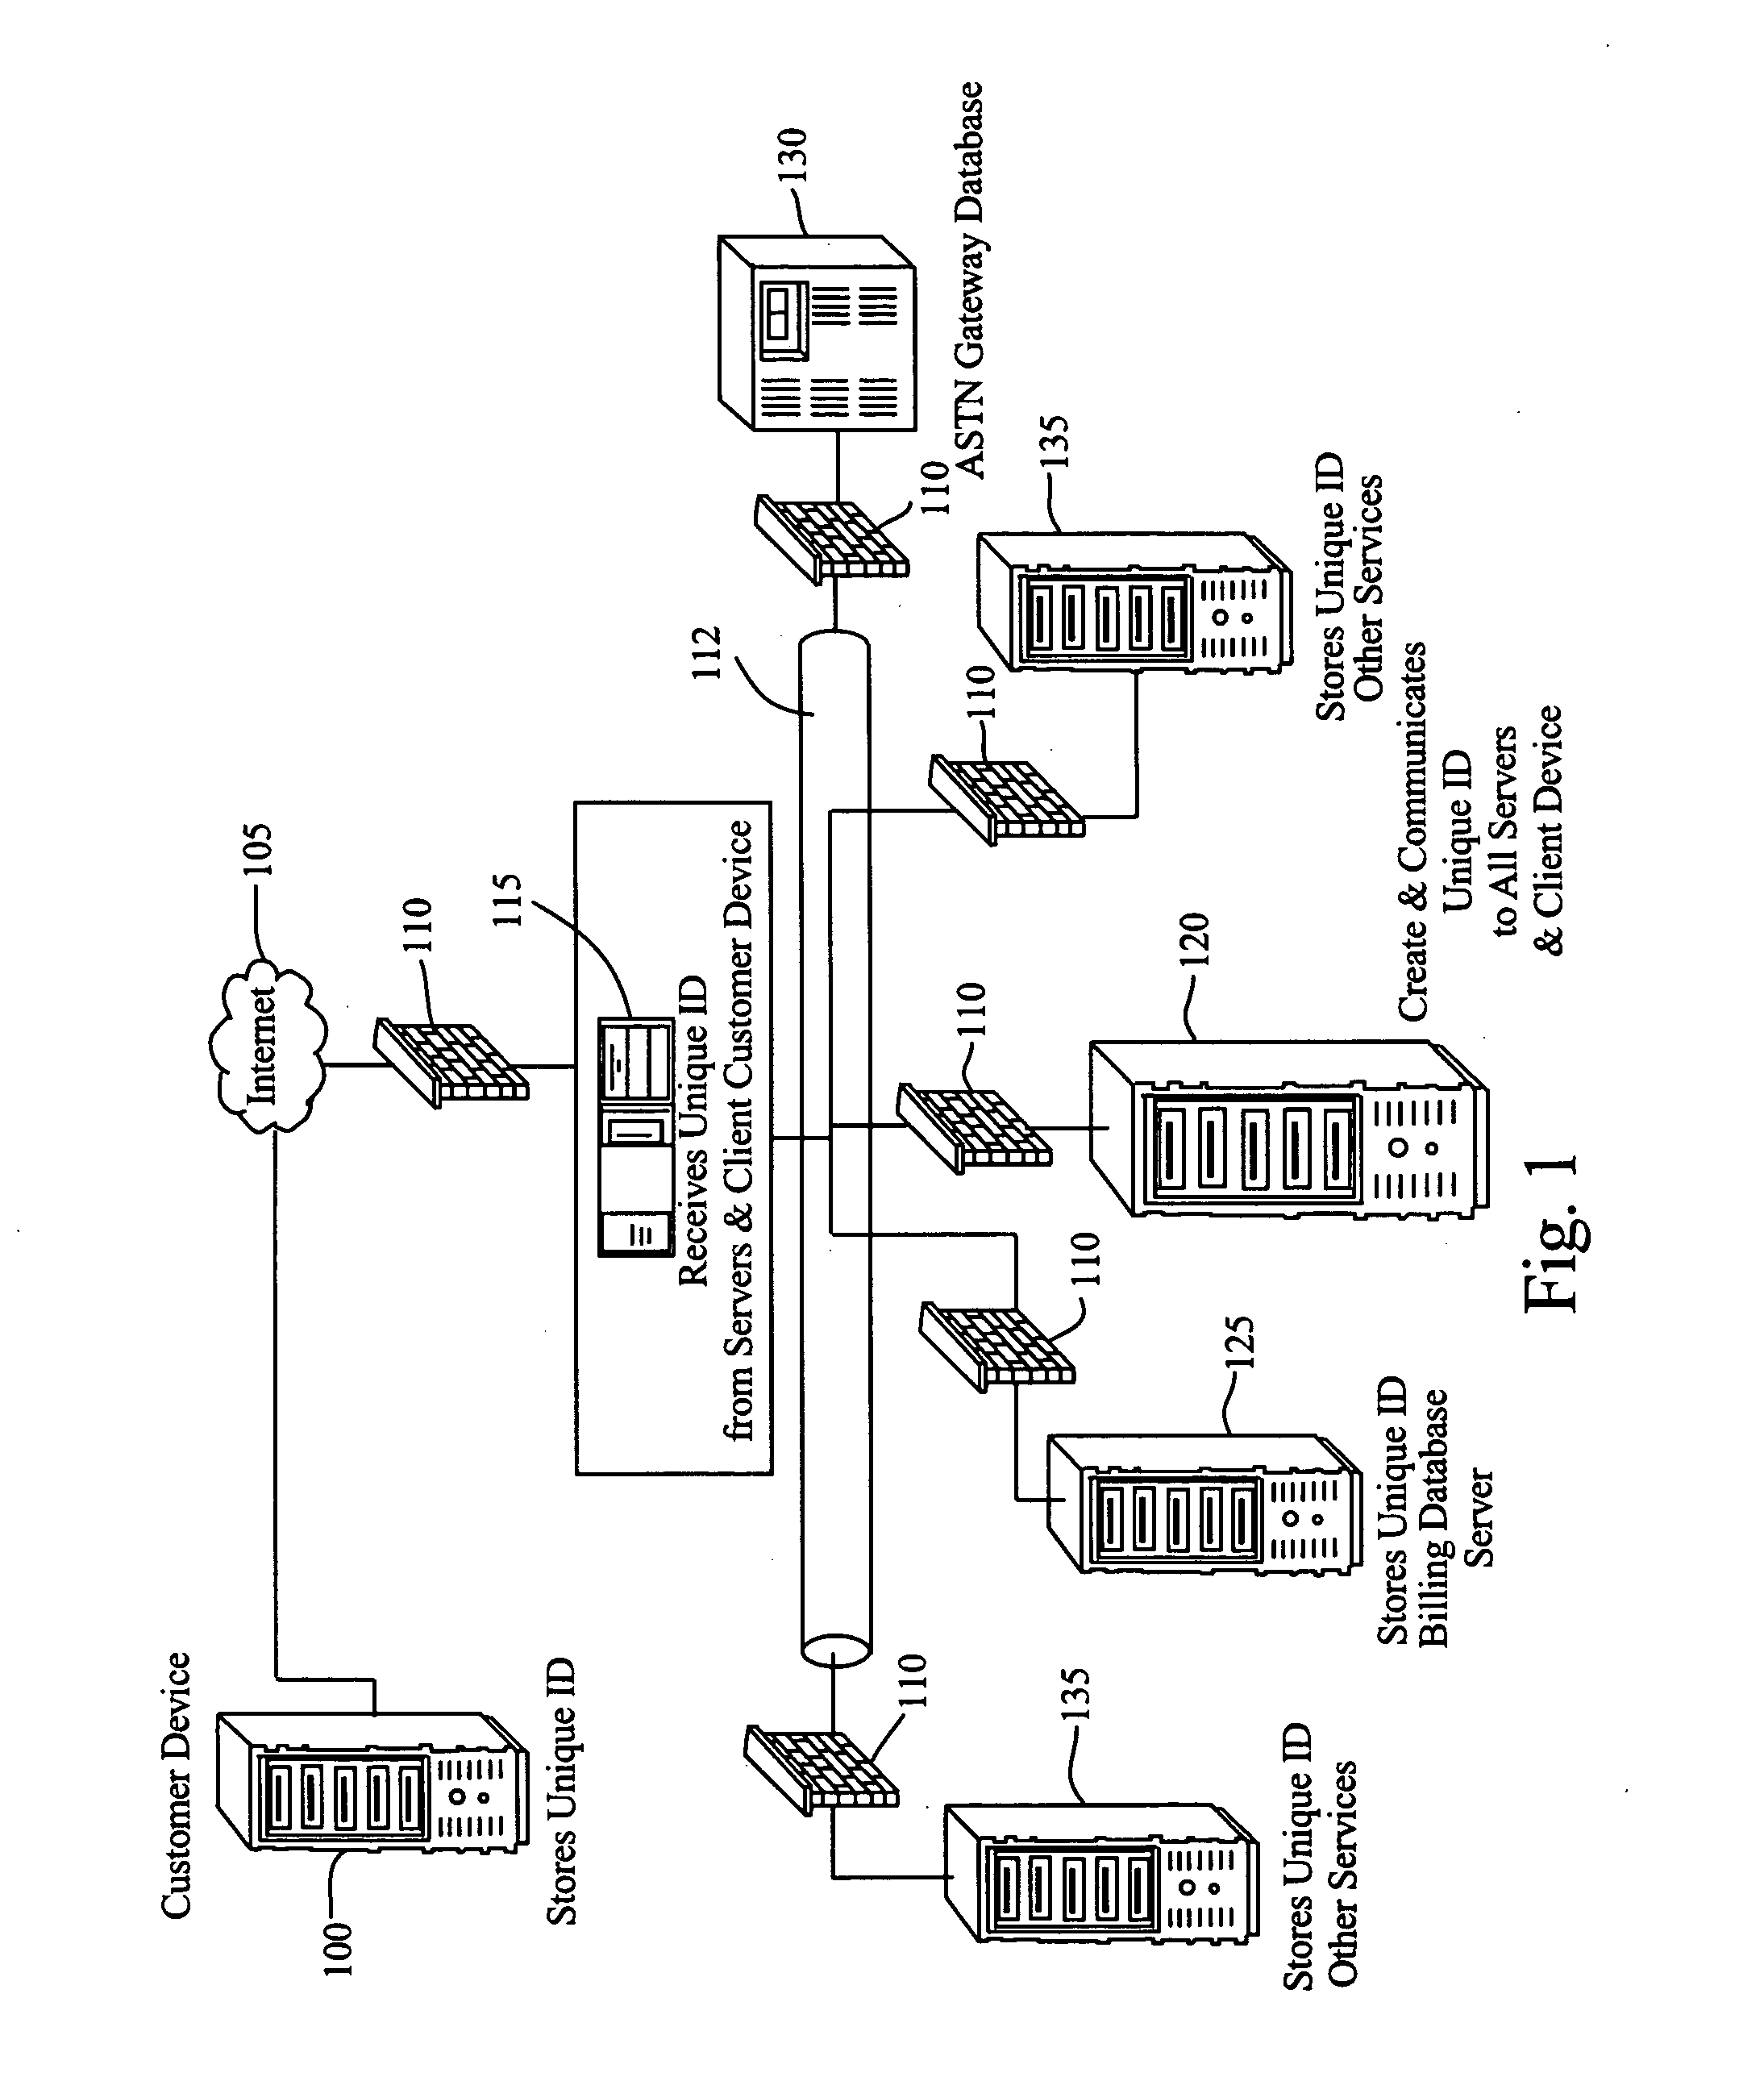 System for ubiquitous network presence and access without cookies